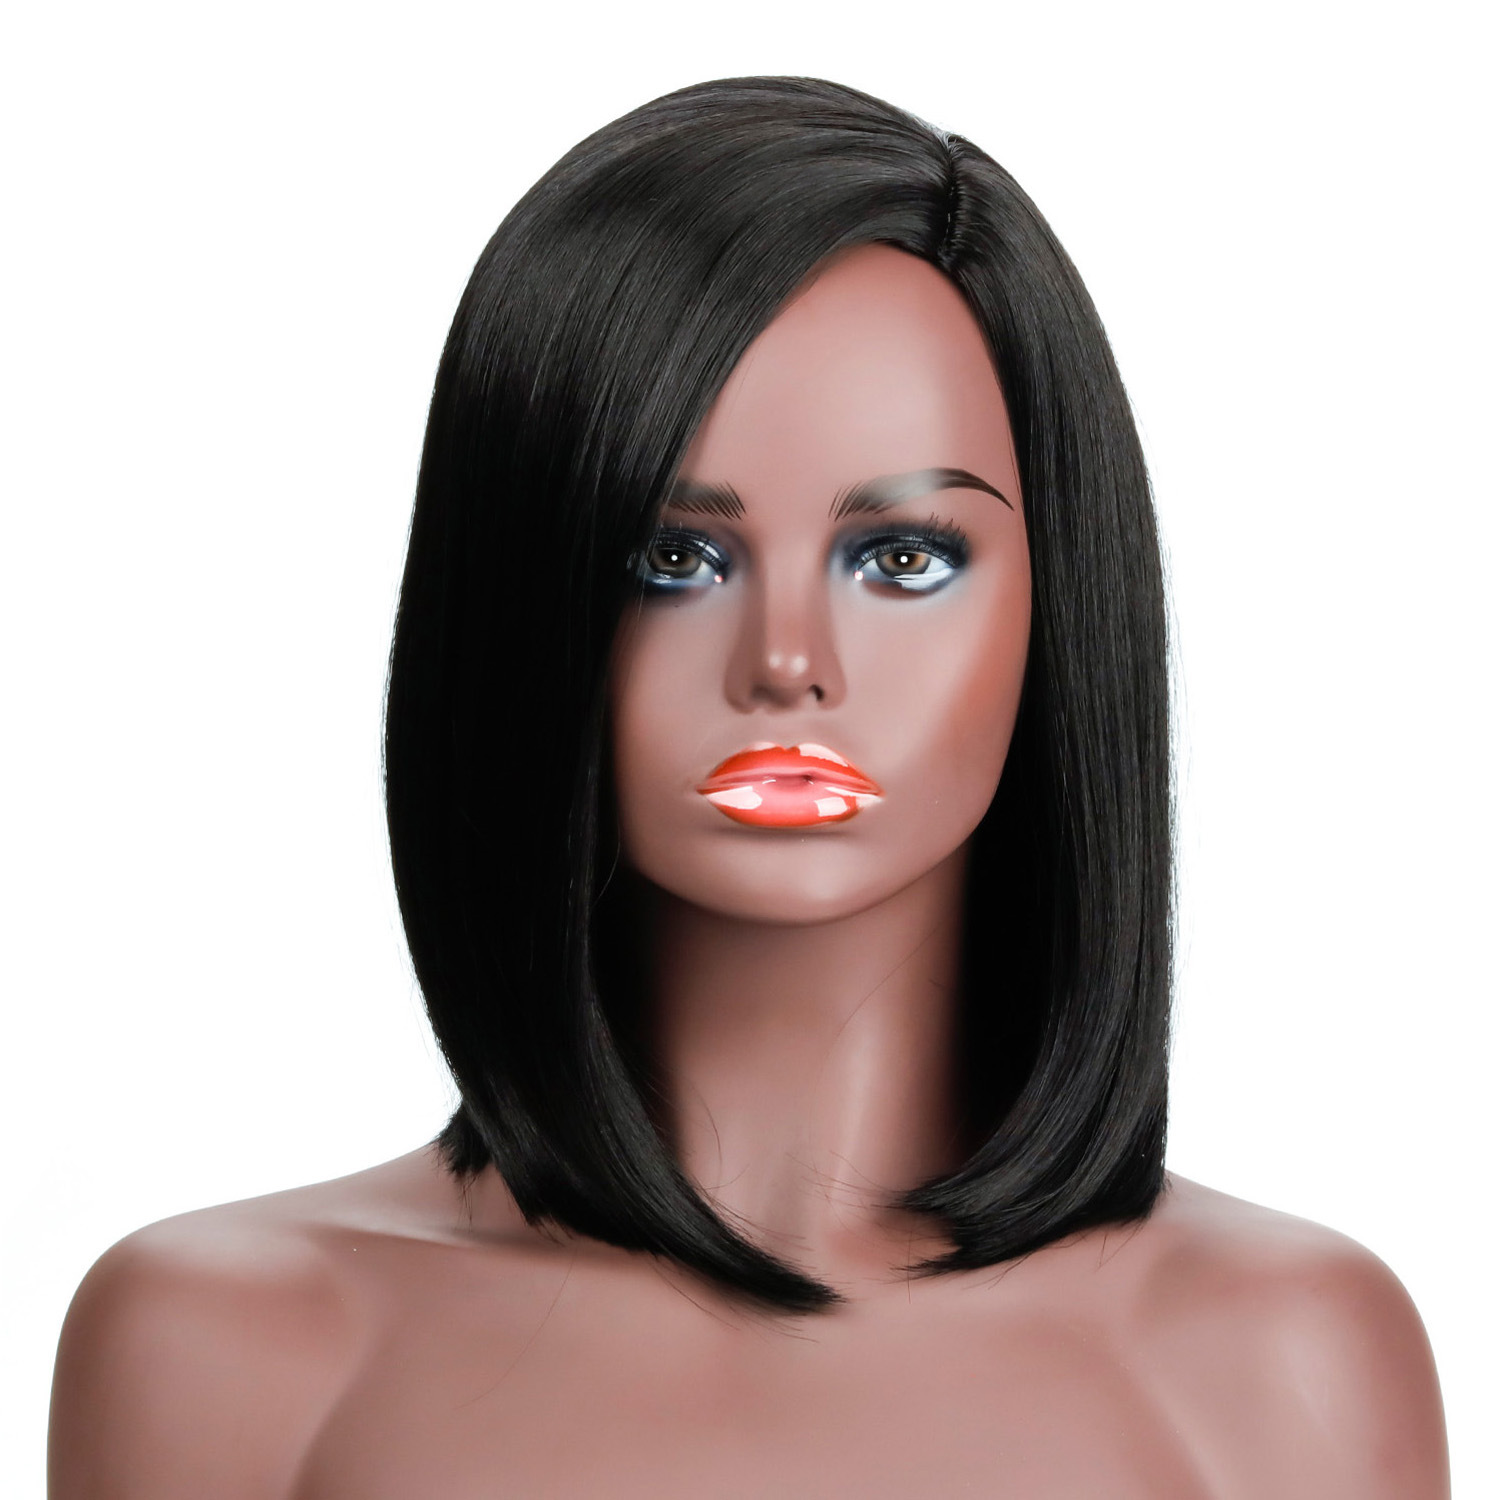 A stylish synthetic wig for women with straight black hair of medium length, perfect for a fashionable look